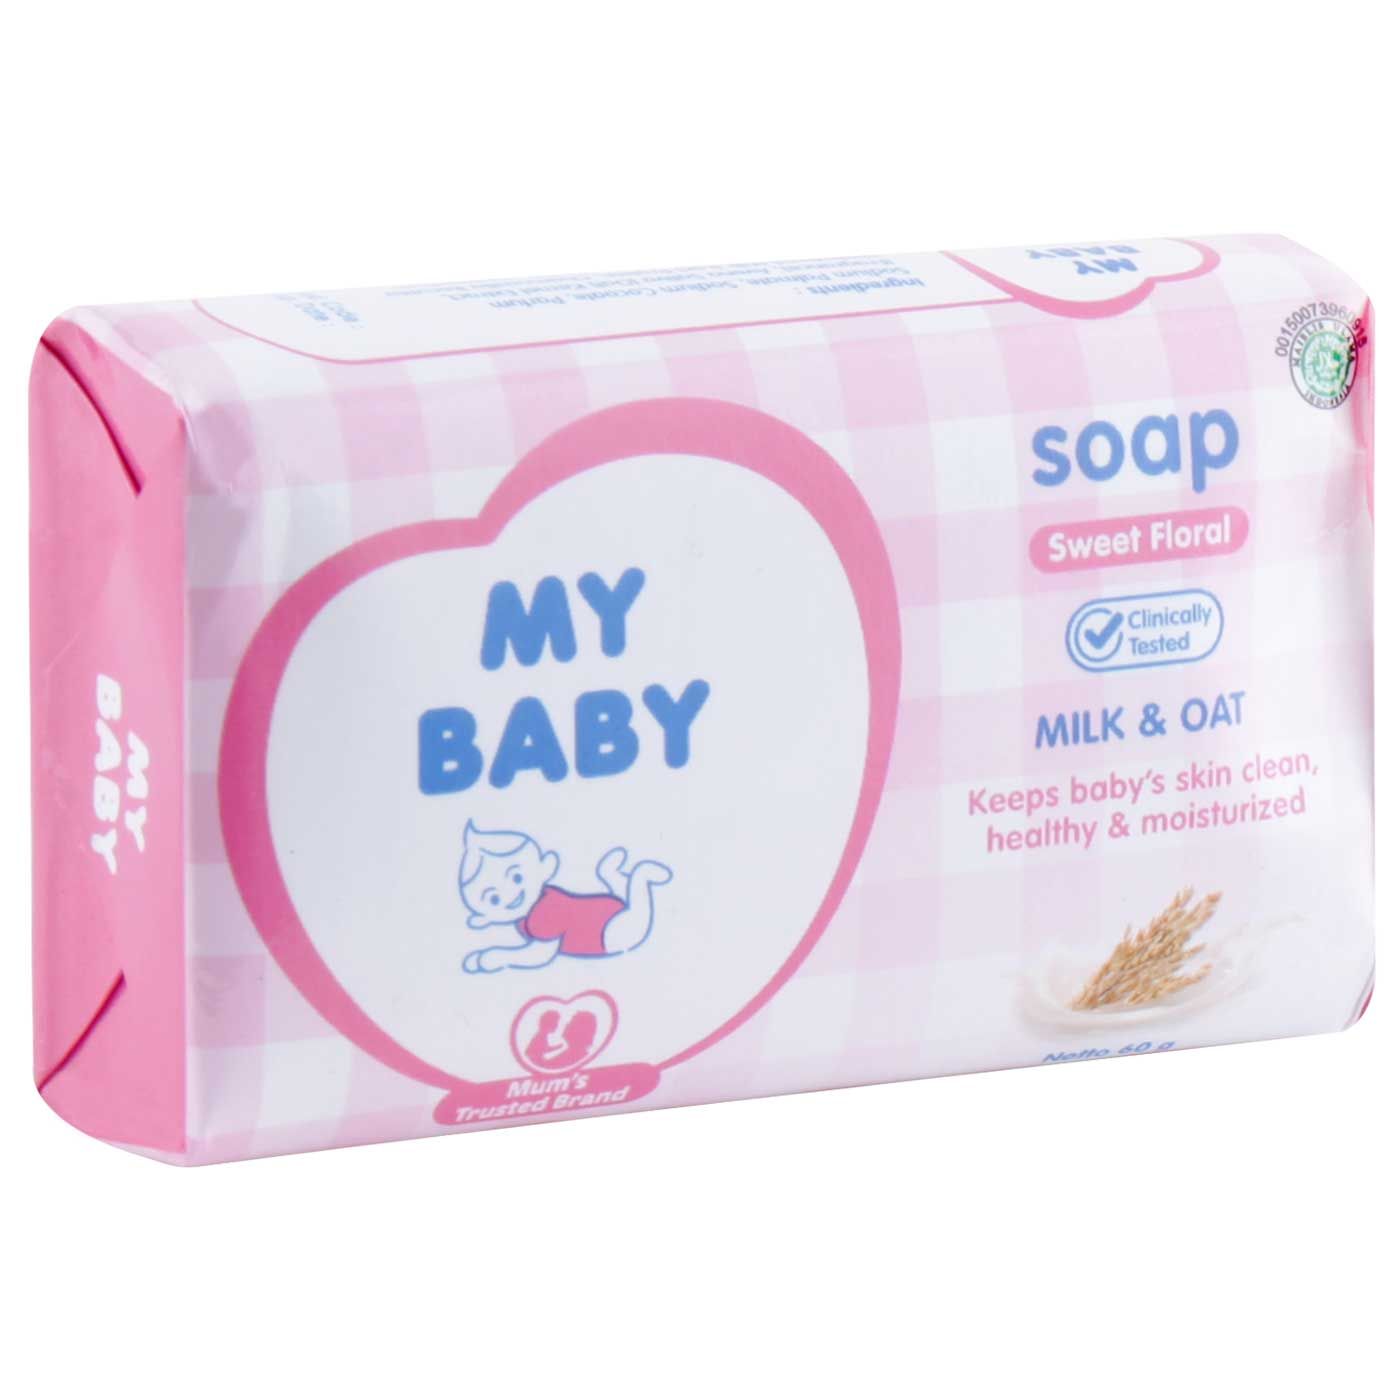 My Baby Soap Sweet Floral 60gr - 3